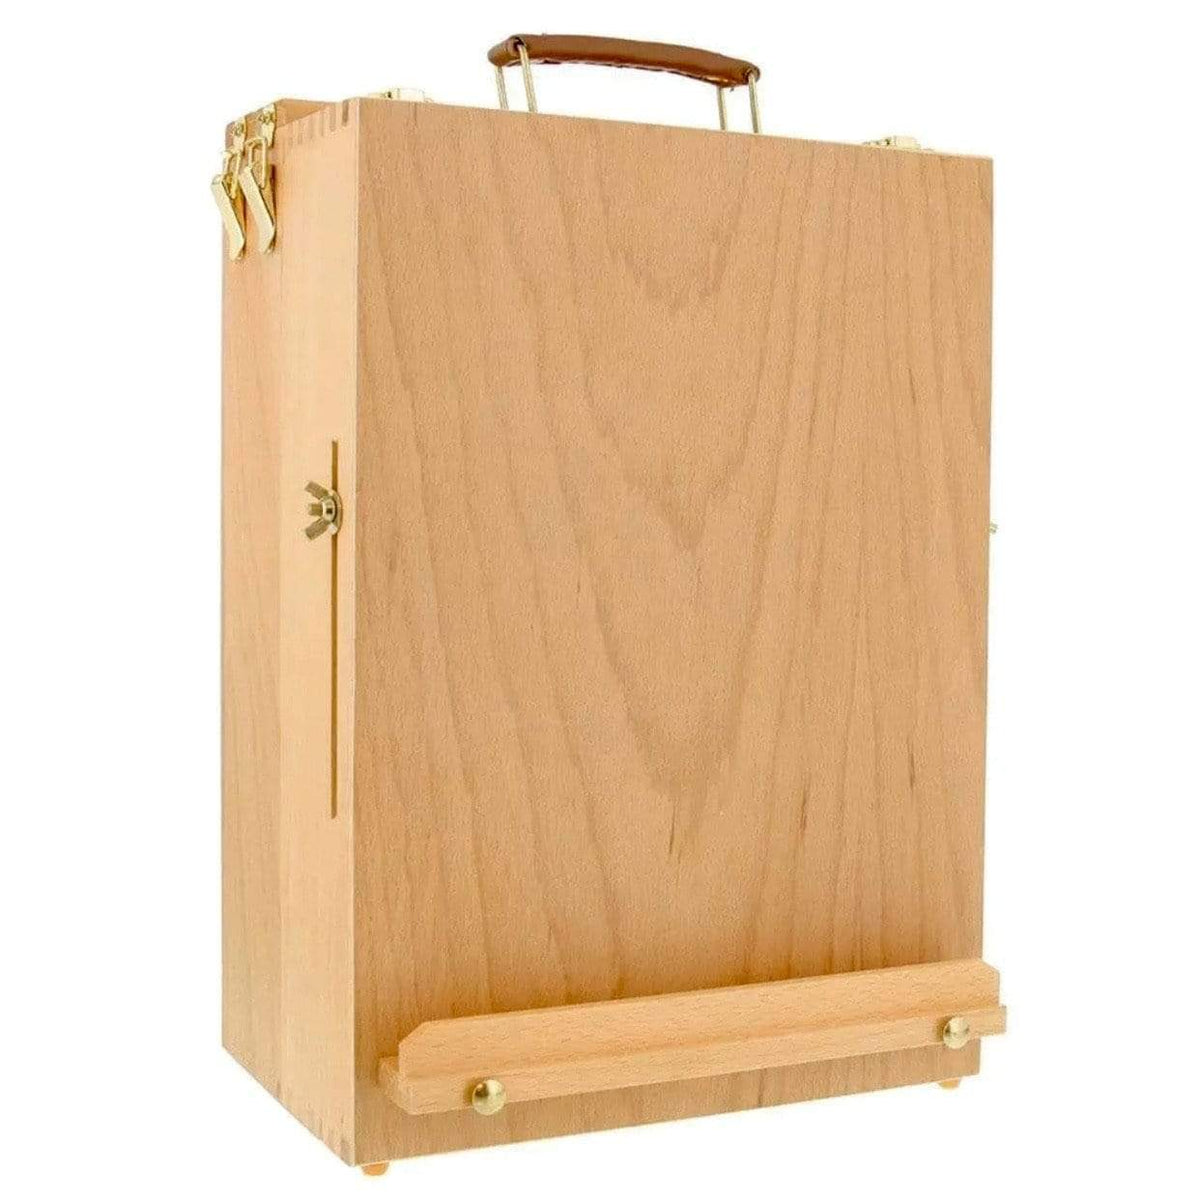 DEAYOU Wood Tabletop Easel Storage Box, Beechwood Portable Sketchbox for Painting, Wooden Desktop Adjustable Drawing Easel Case for Art Supplies, Pain